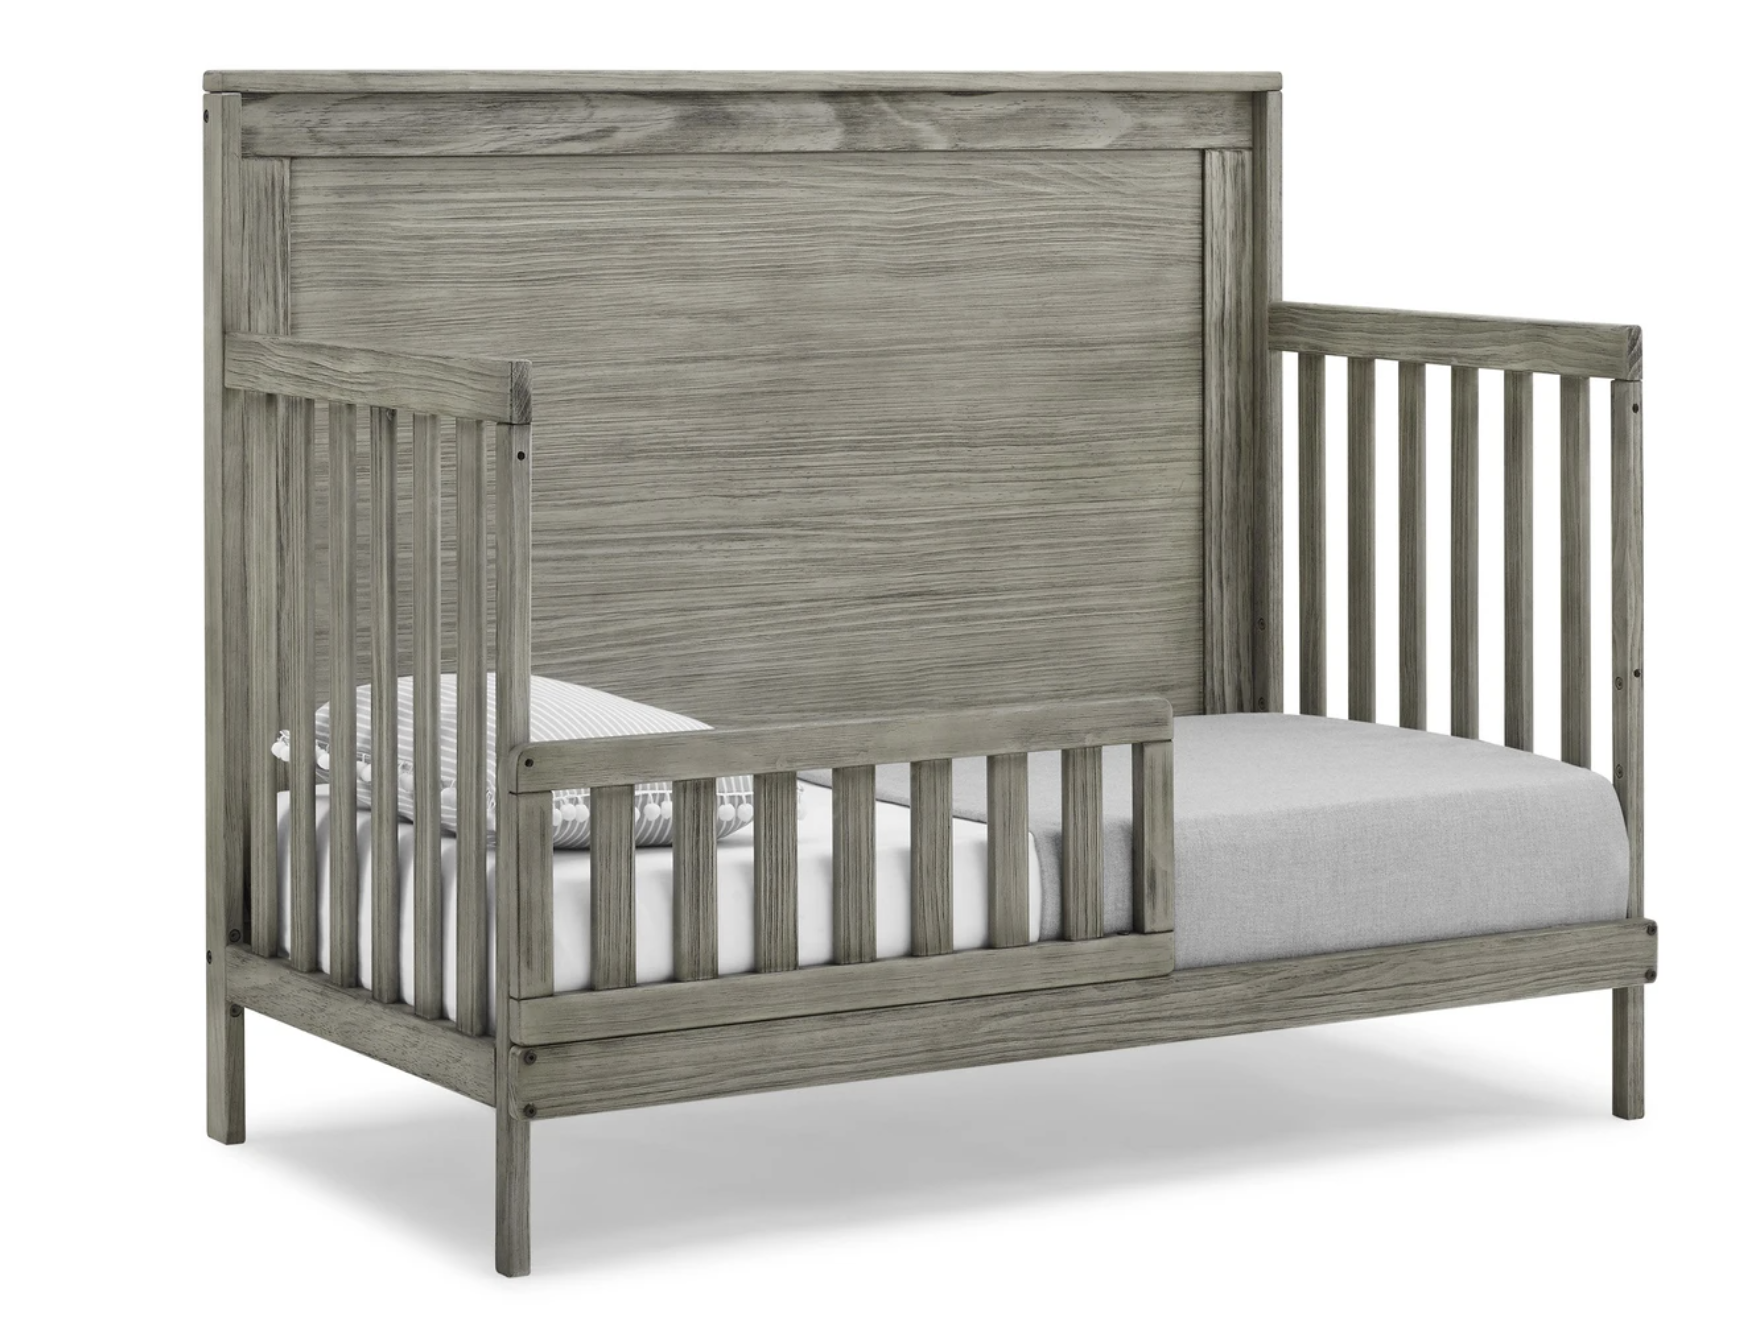 Simmons Kids Willow 6-in-1 Convertible Crib